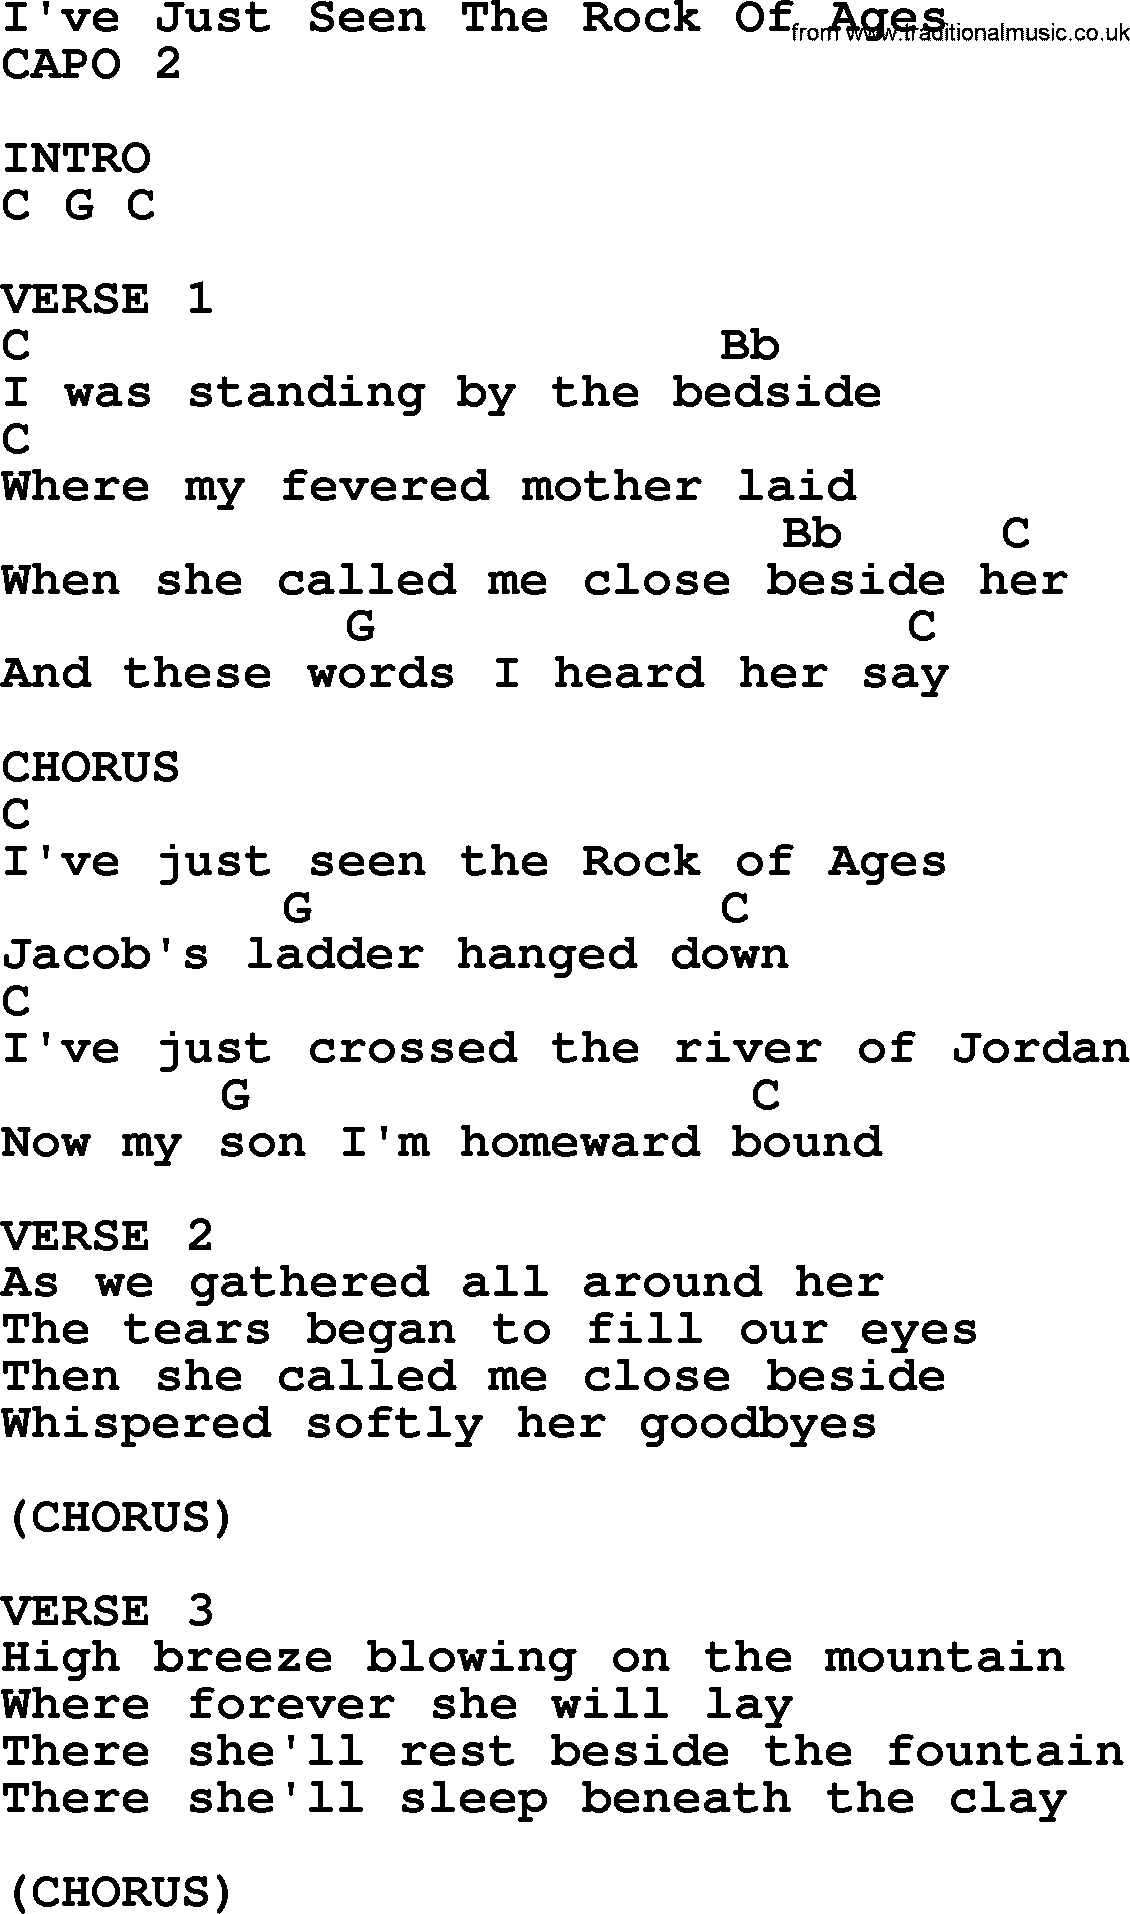 Bluegrass song: I've Just Seen The Rock Of Ages, lyrics and chords